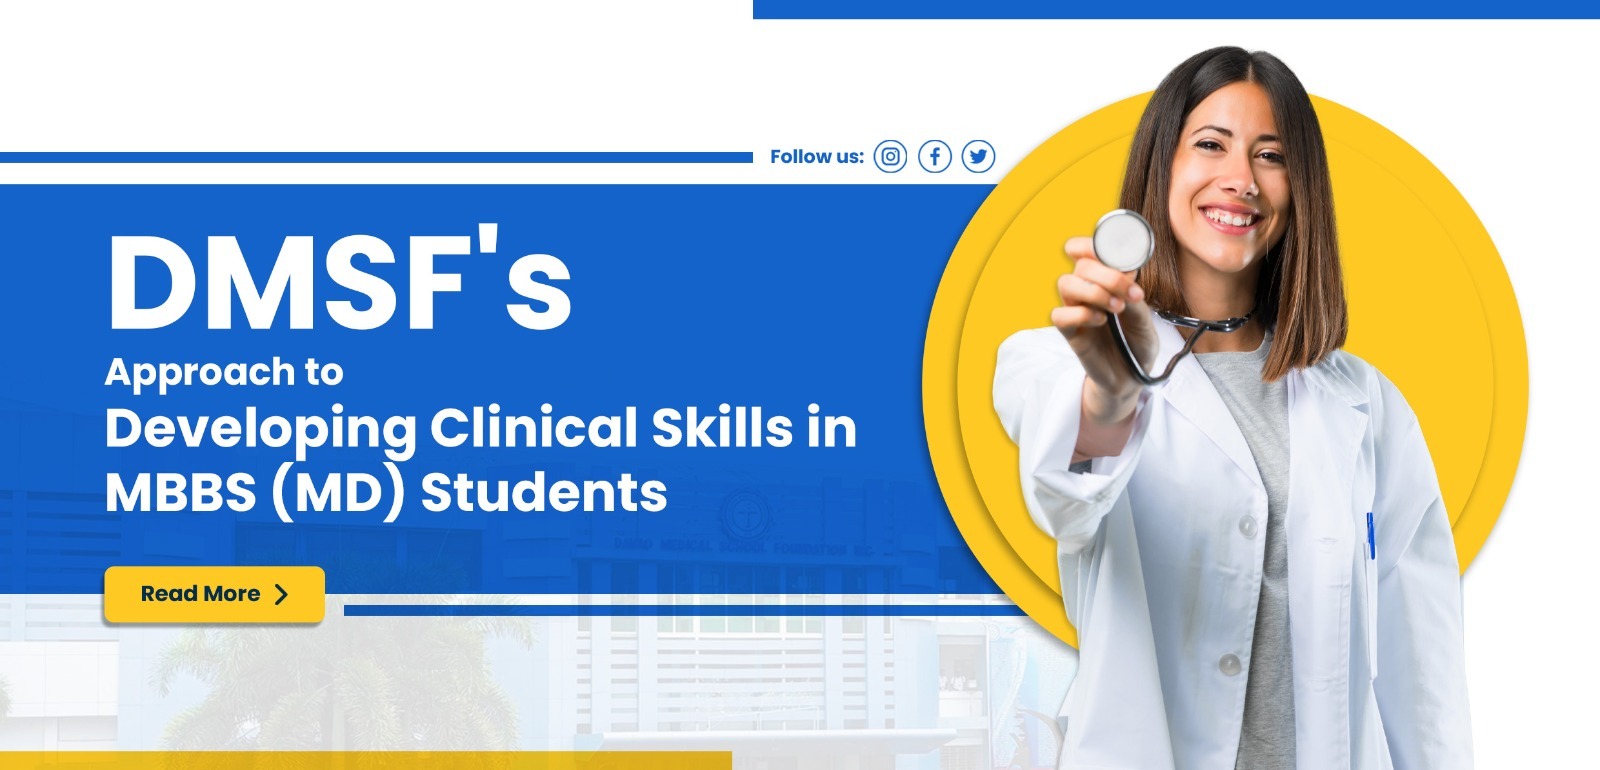 Key features of MBBS (MD) degree at DMSF